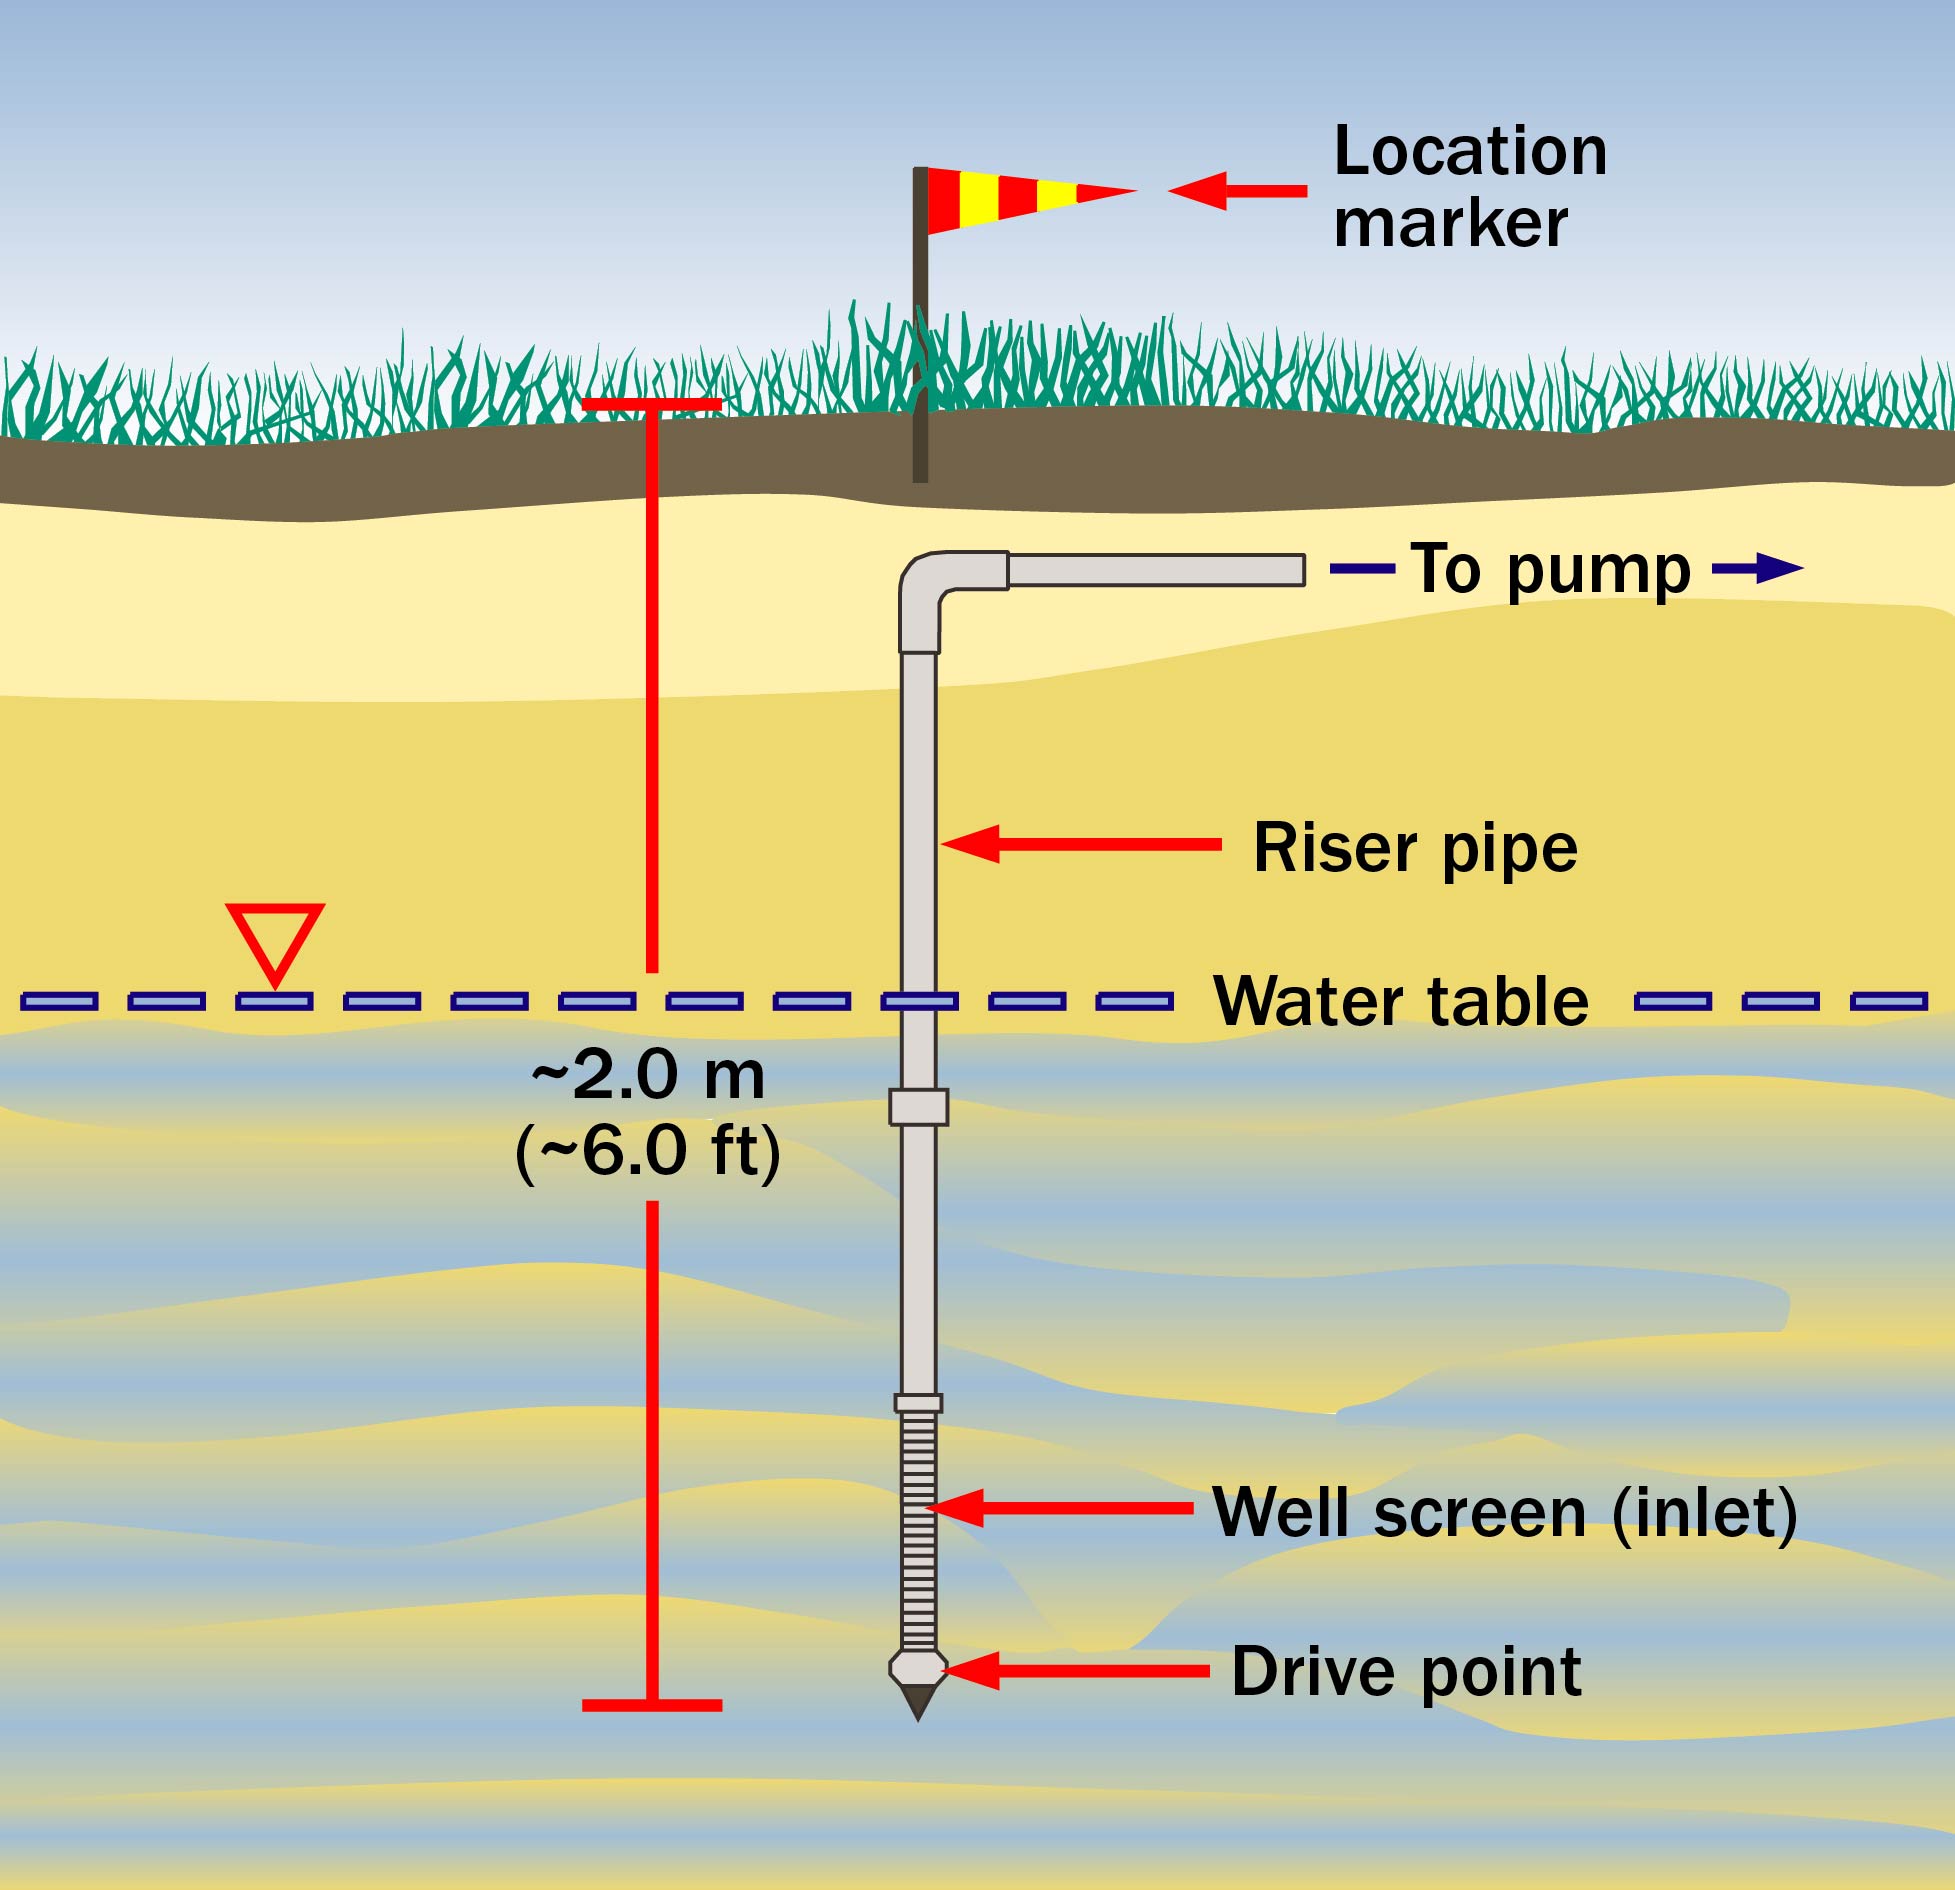 Figure 3. Diagram showing subsurface view of a sand-point well jetted or driven into a shallow sand or gravel aquifer. Water is drawn by a pump through a well screen into a riser pipe, and then through a buried pipe to the point of use.